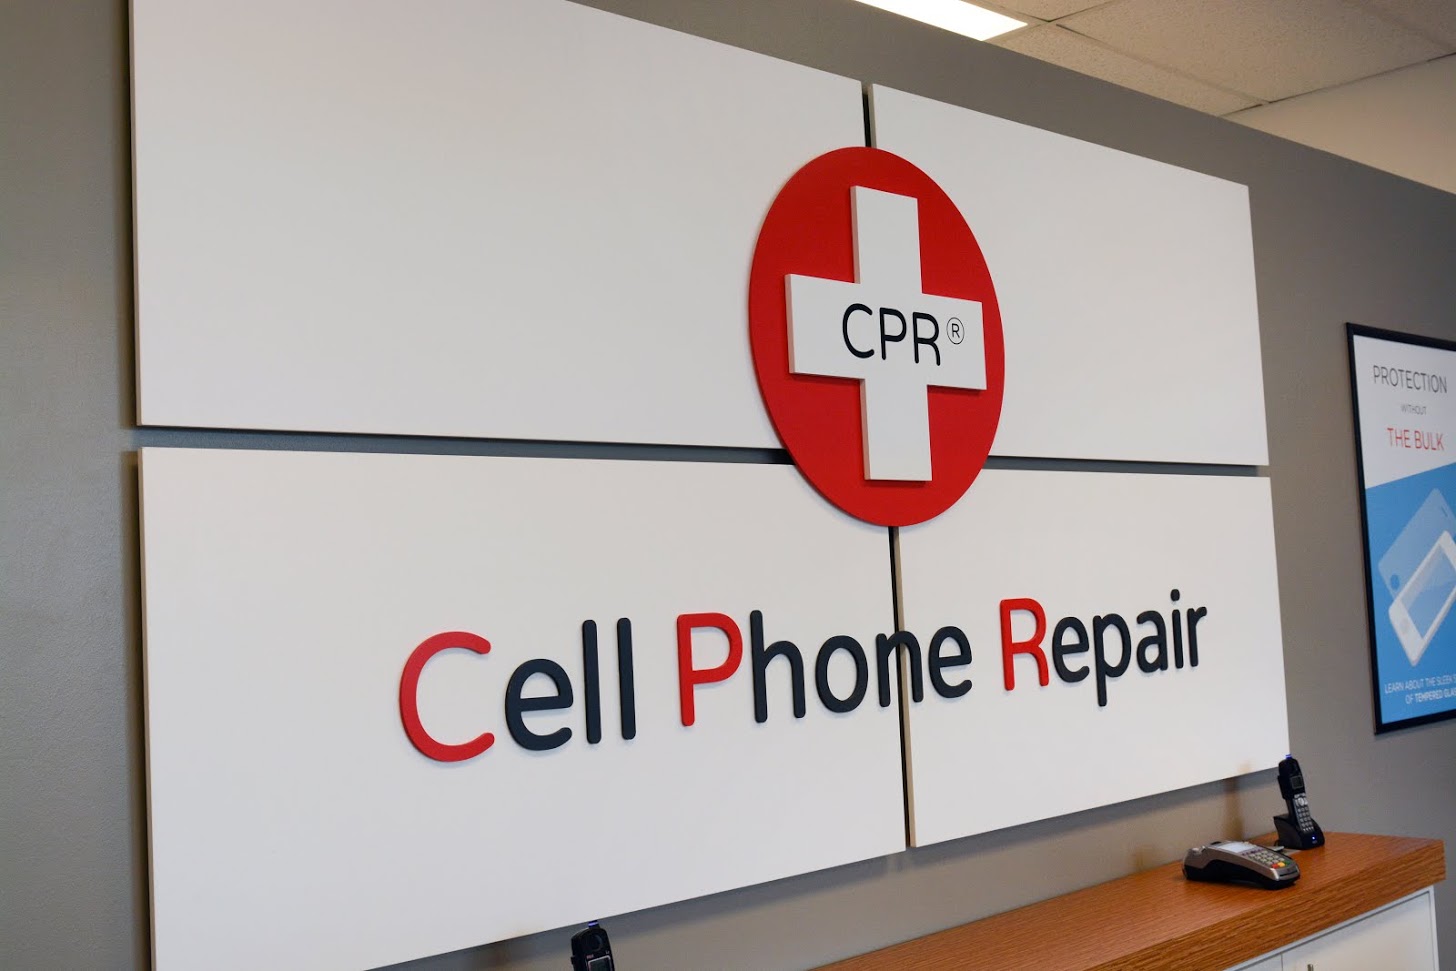 CPR Cell Phone Repair, Friday, January 10, 2020, Press release picture